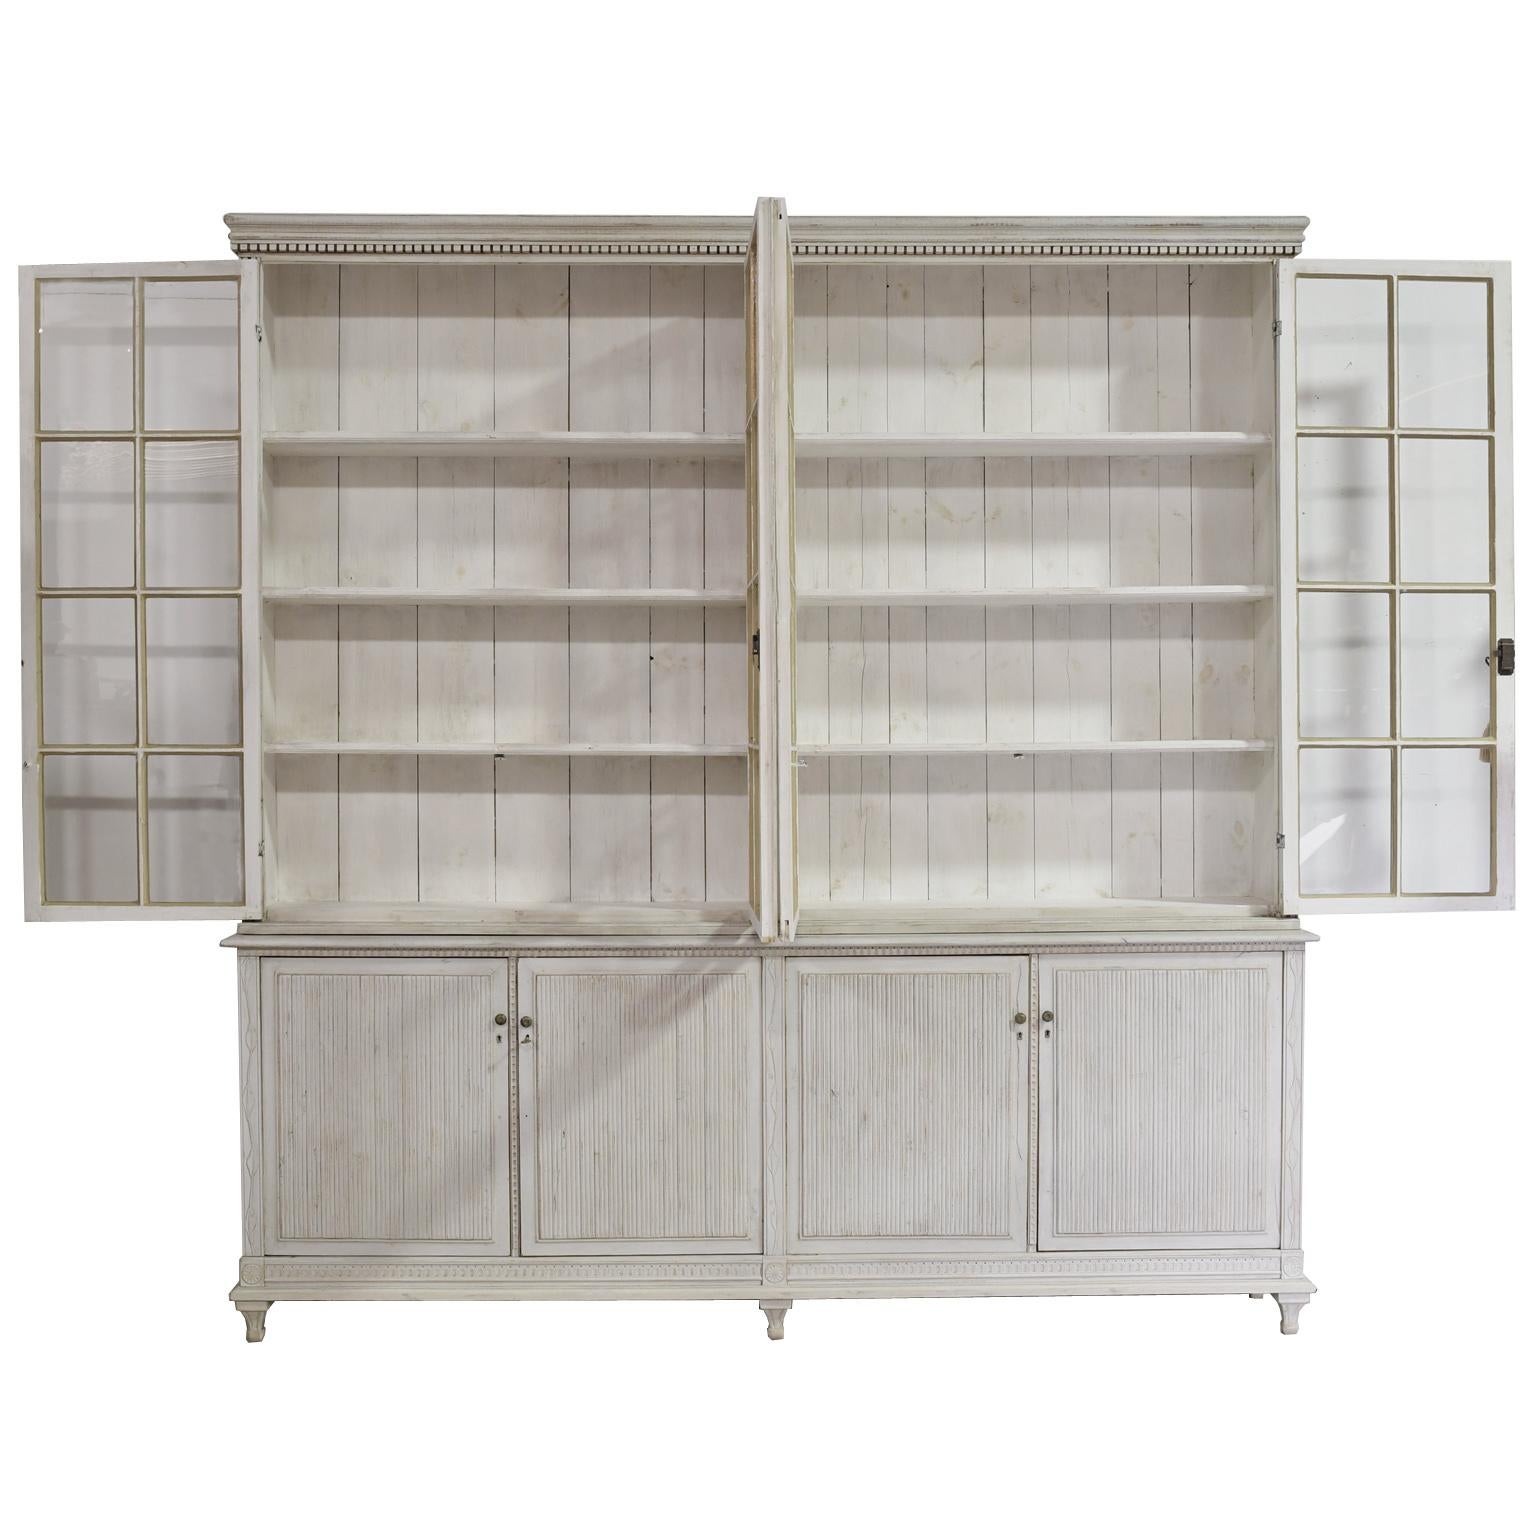 Swedish 20th Century Grey-Painted Gustavian-Style Glass-Front Bookcase Cabinet, Sweden